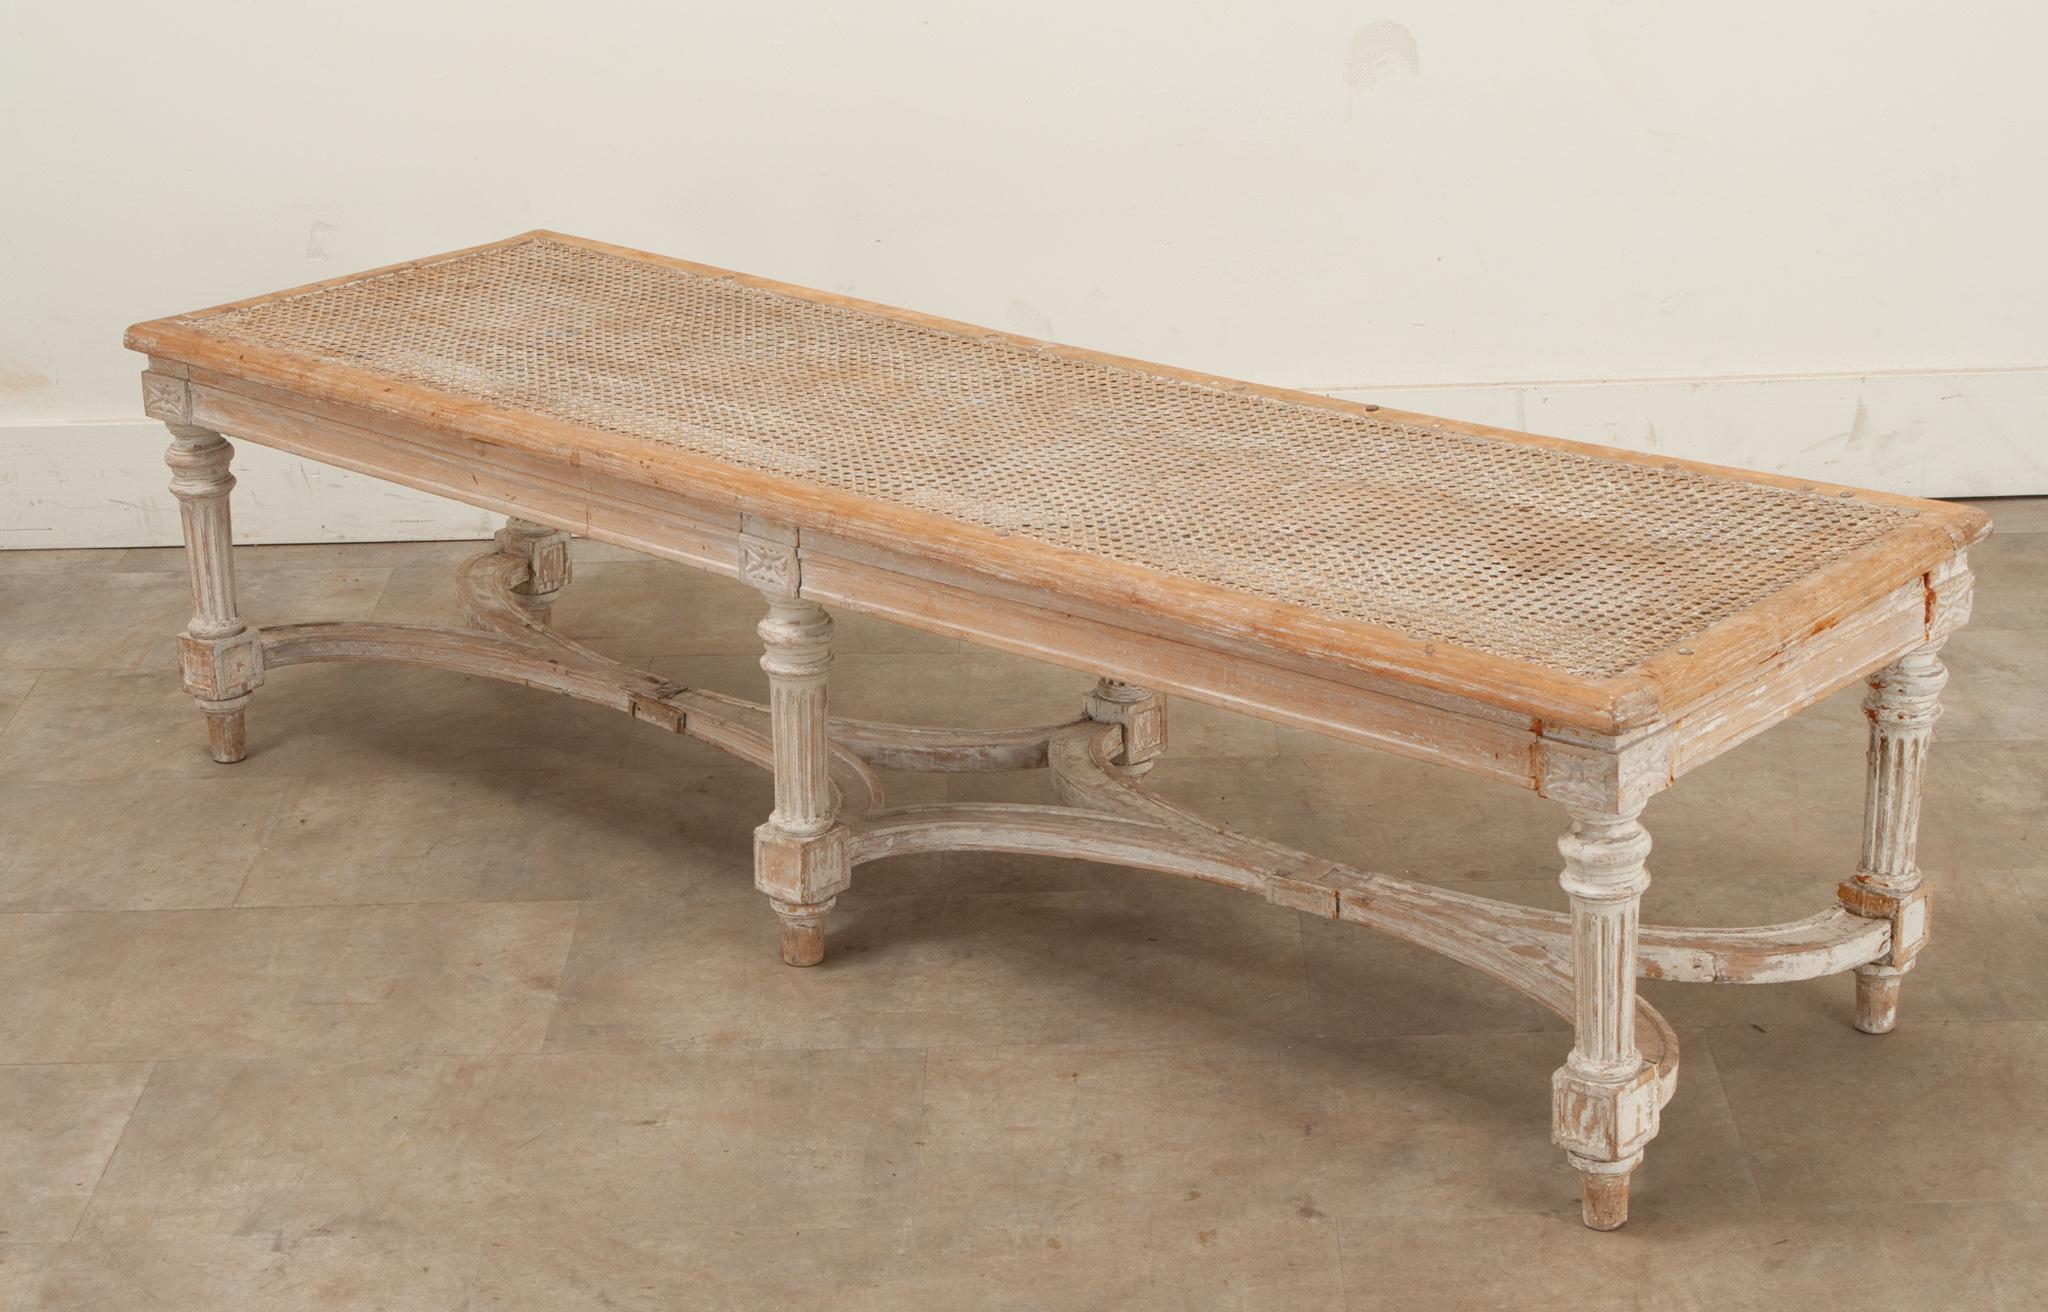 A long Swedish Louis XVI style bench, perfect at the end of a king bed. This top of this antique bench is made of cane with a light white-washed wood frame. This sturdy bench has six fluted legs that connect with a shaped stretcher. Be sure to view